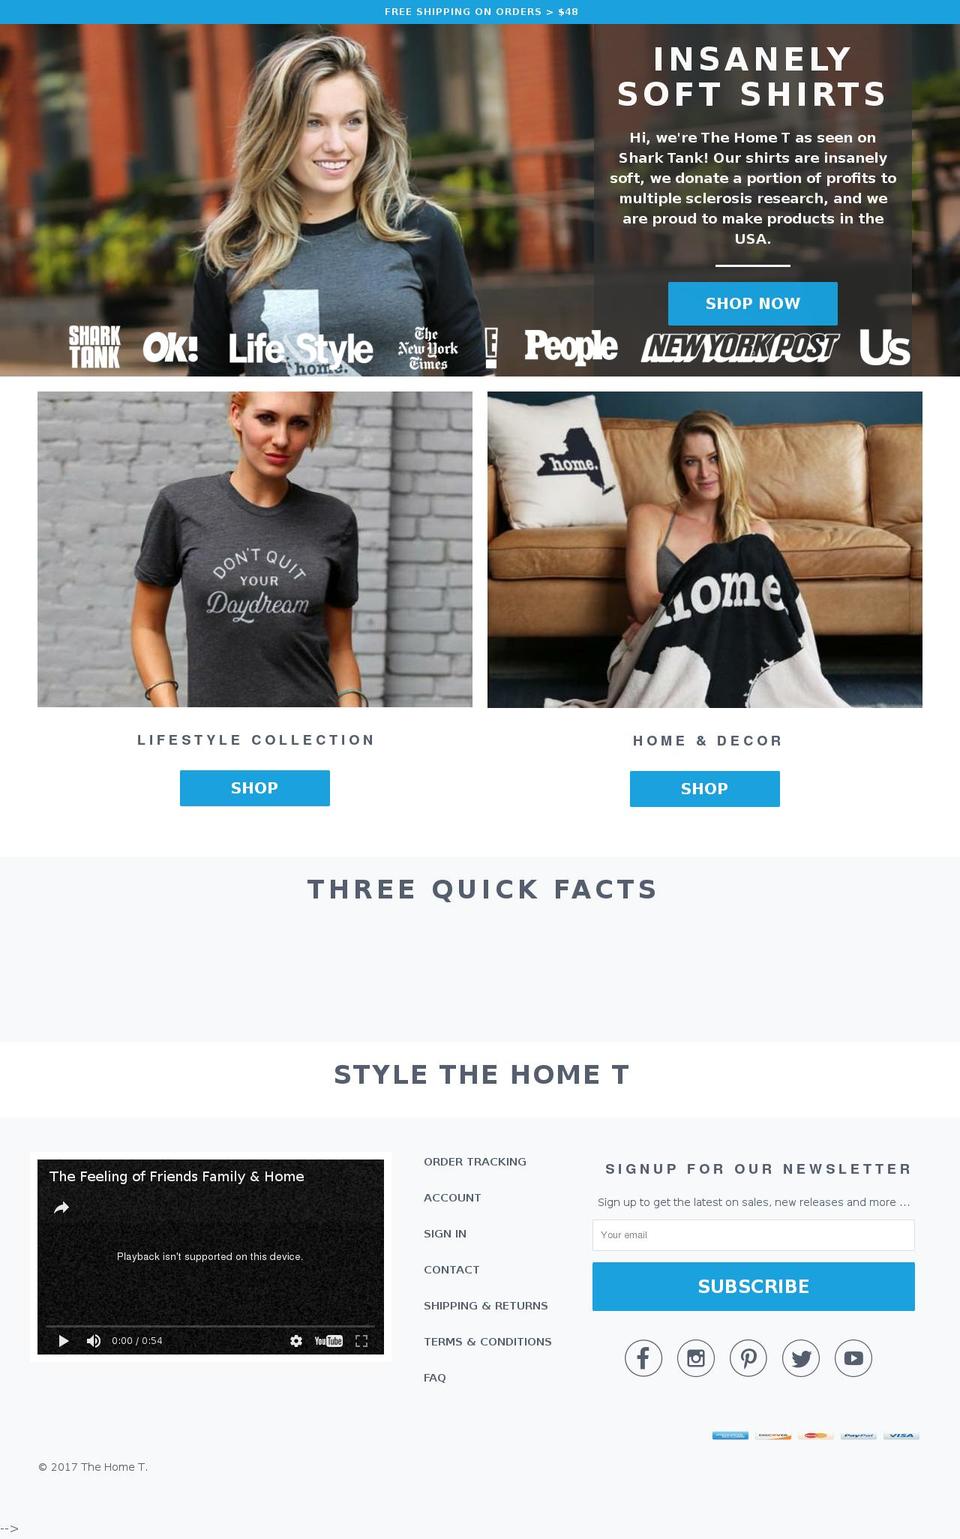 Focal Shopify theme site example thehomet.com